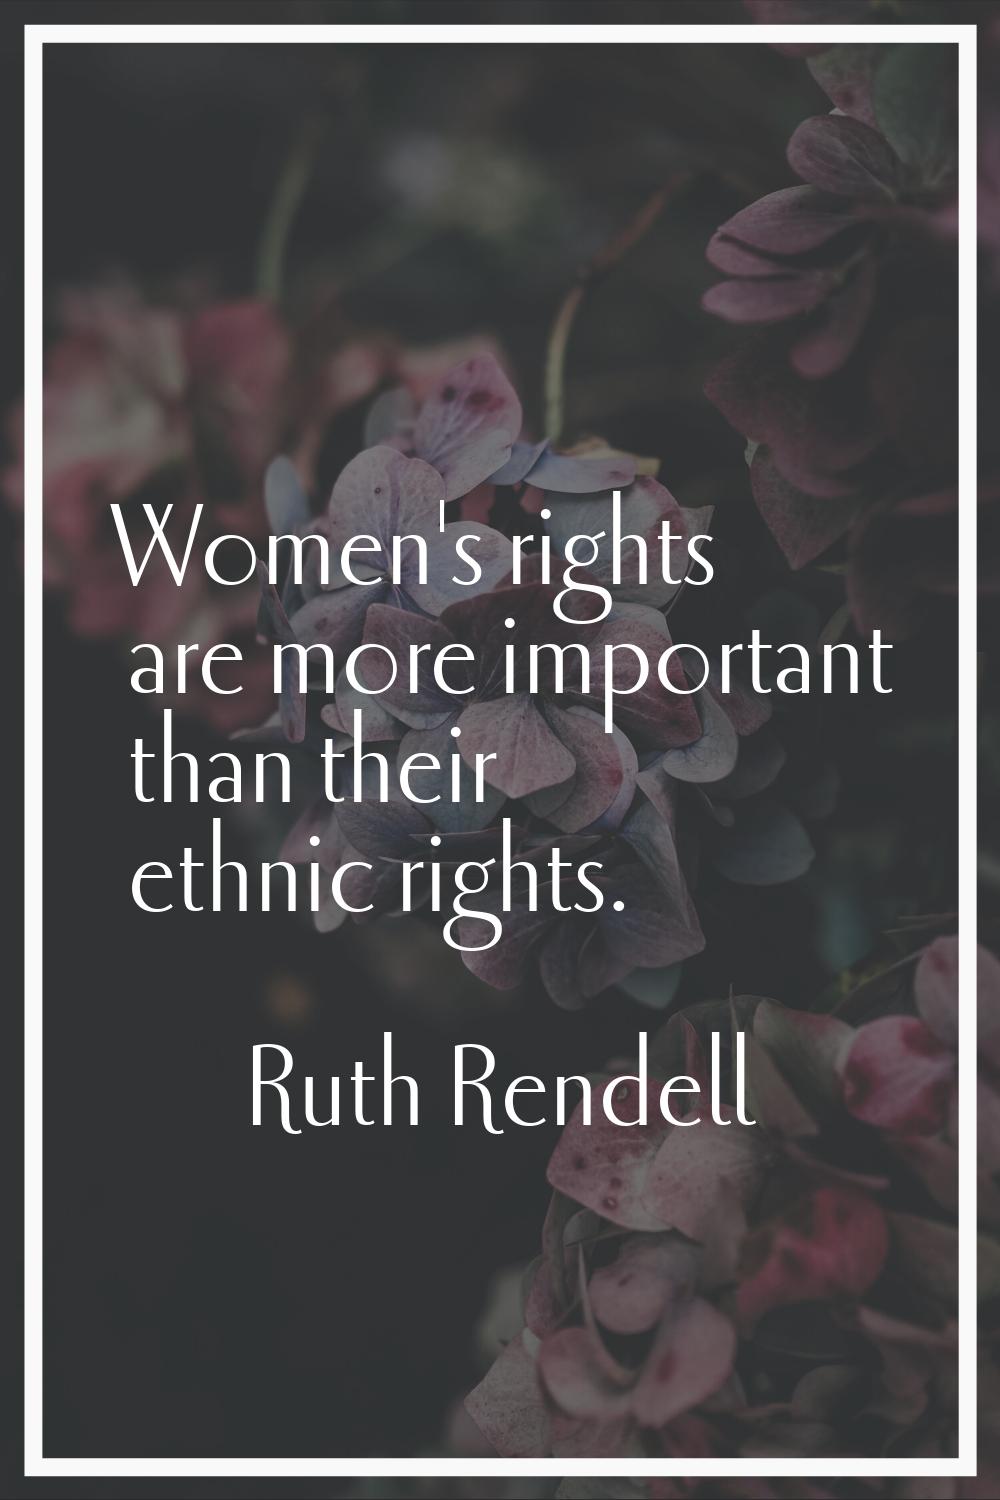 Women's rights are more important than their ethnic rights.